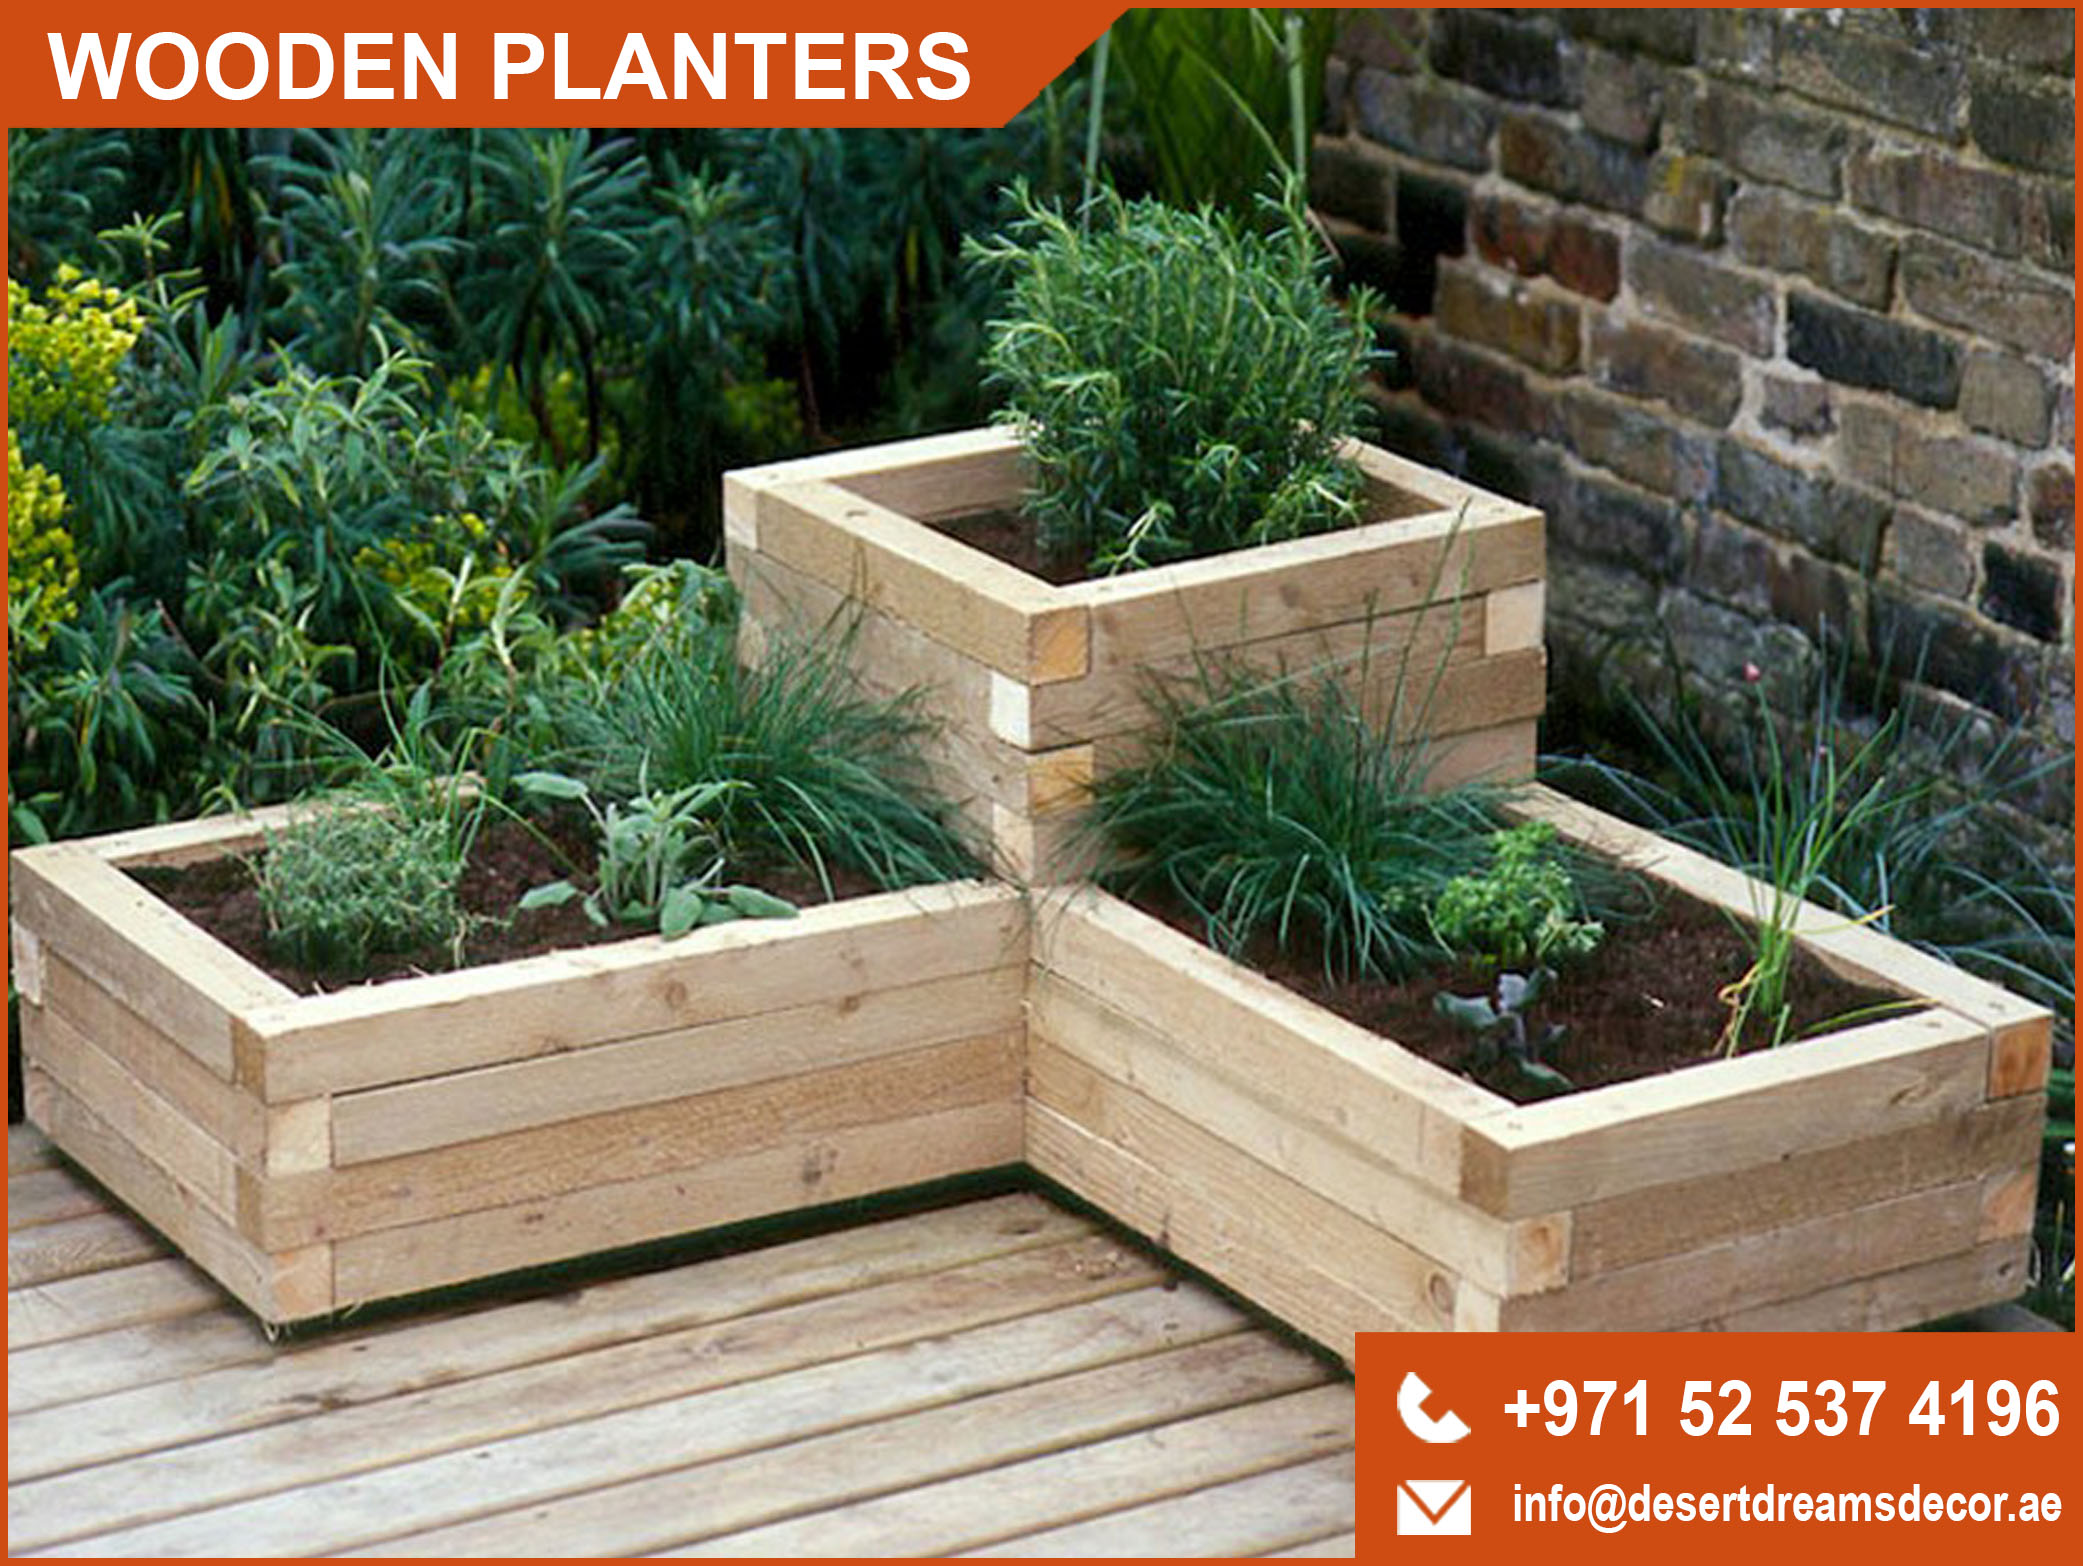 Wooden Planter Box Suppliers in Uae | Wooden Sitting | Fences.